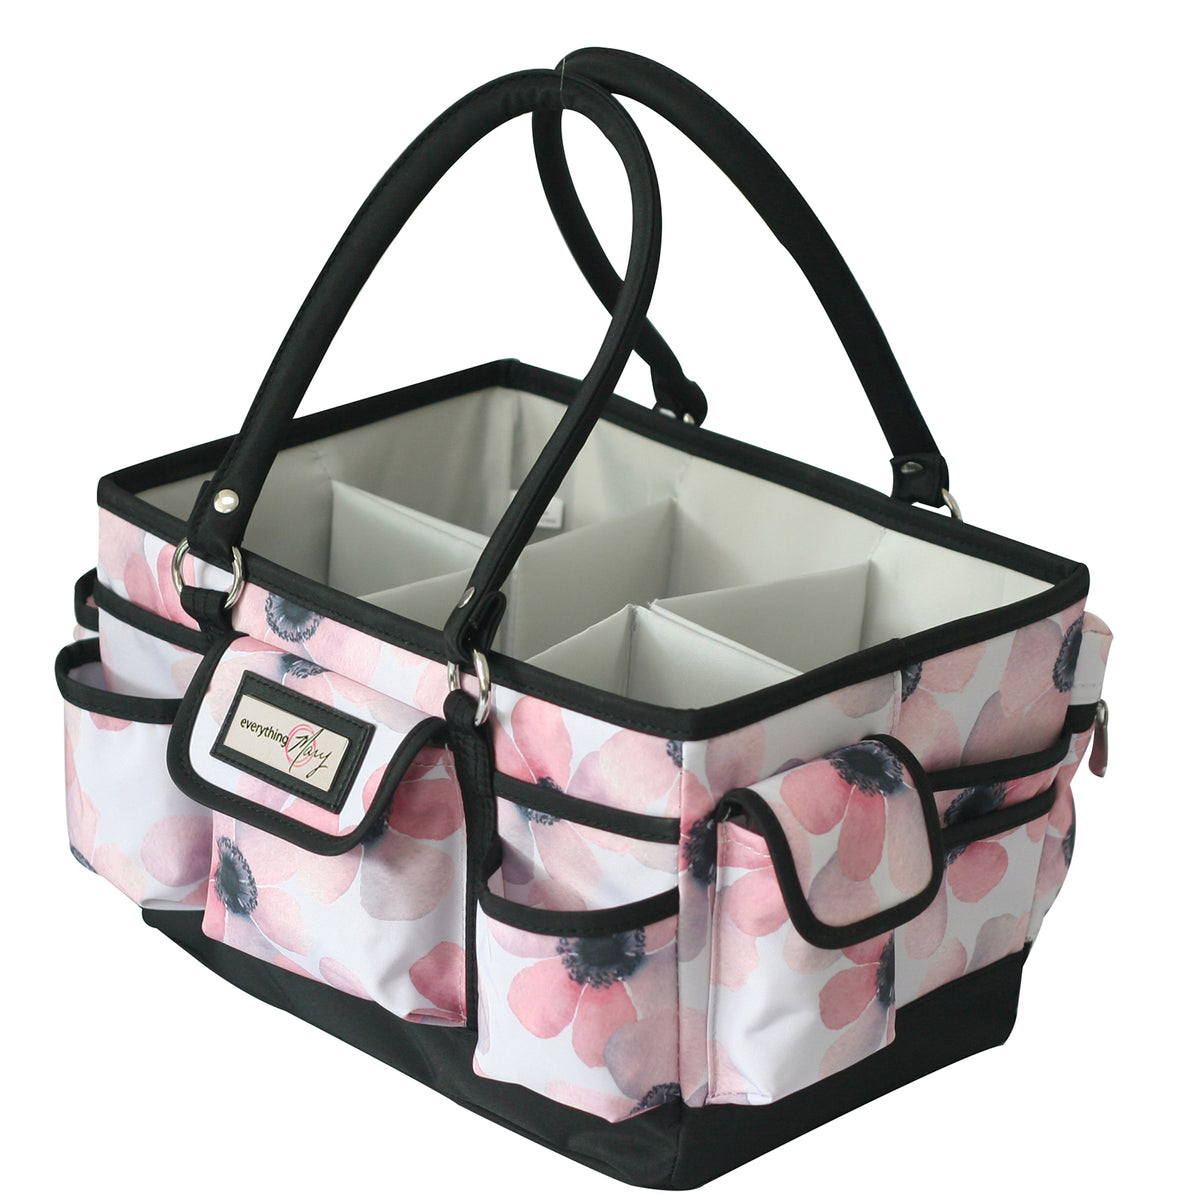 Deluxe Store & Tote Craft Organizer, White & Floral - Everything Mary